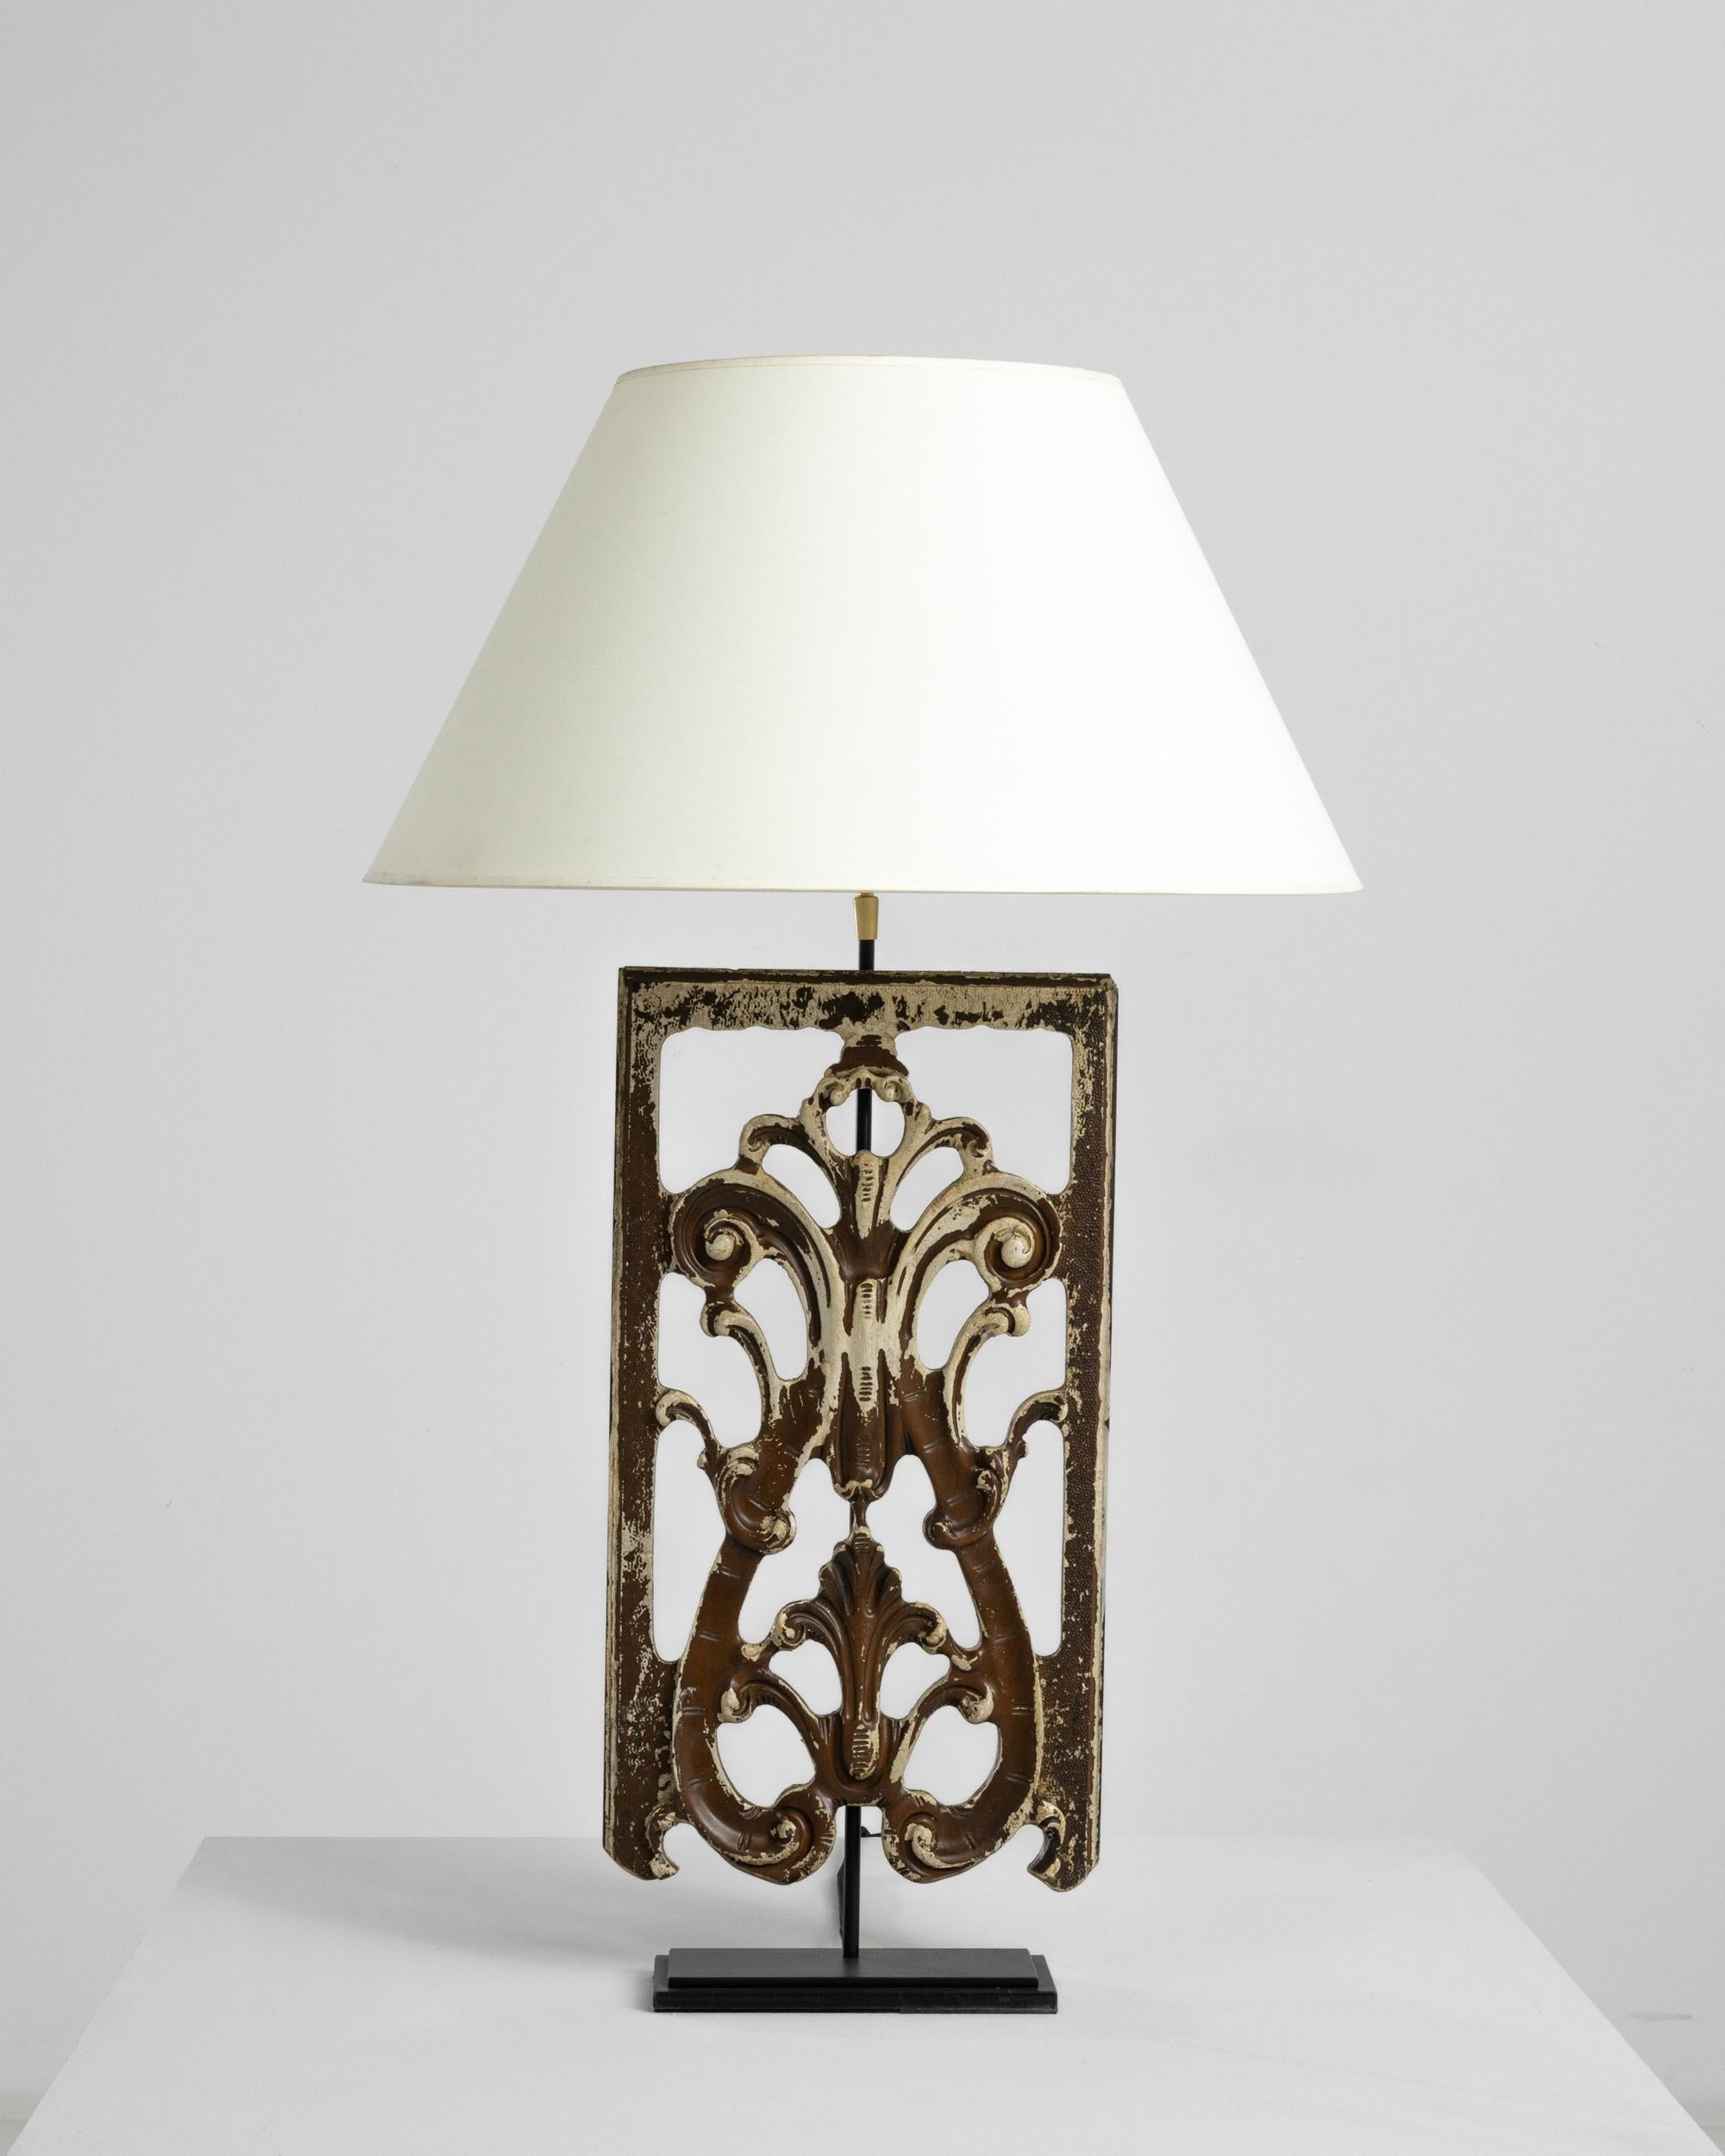 Made from a piece of reclaimed wooden ornament, this table lamp makes a truly unique accent. The base was originally carved in turn of the century France, and most likely formed part of an architectural composition. When the lamp is illuminated, the